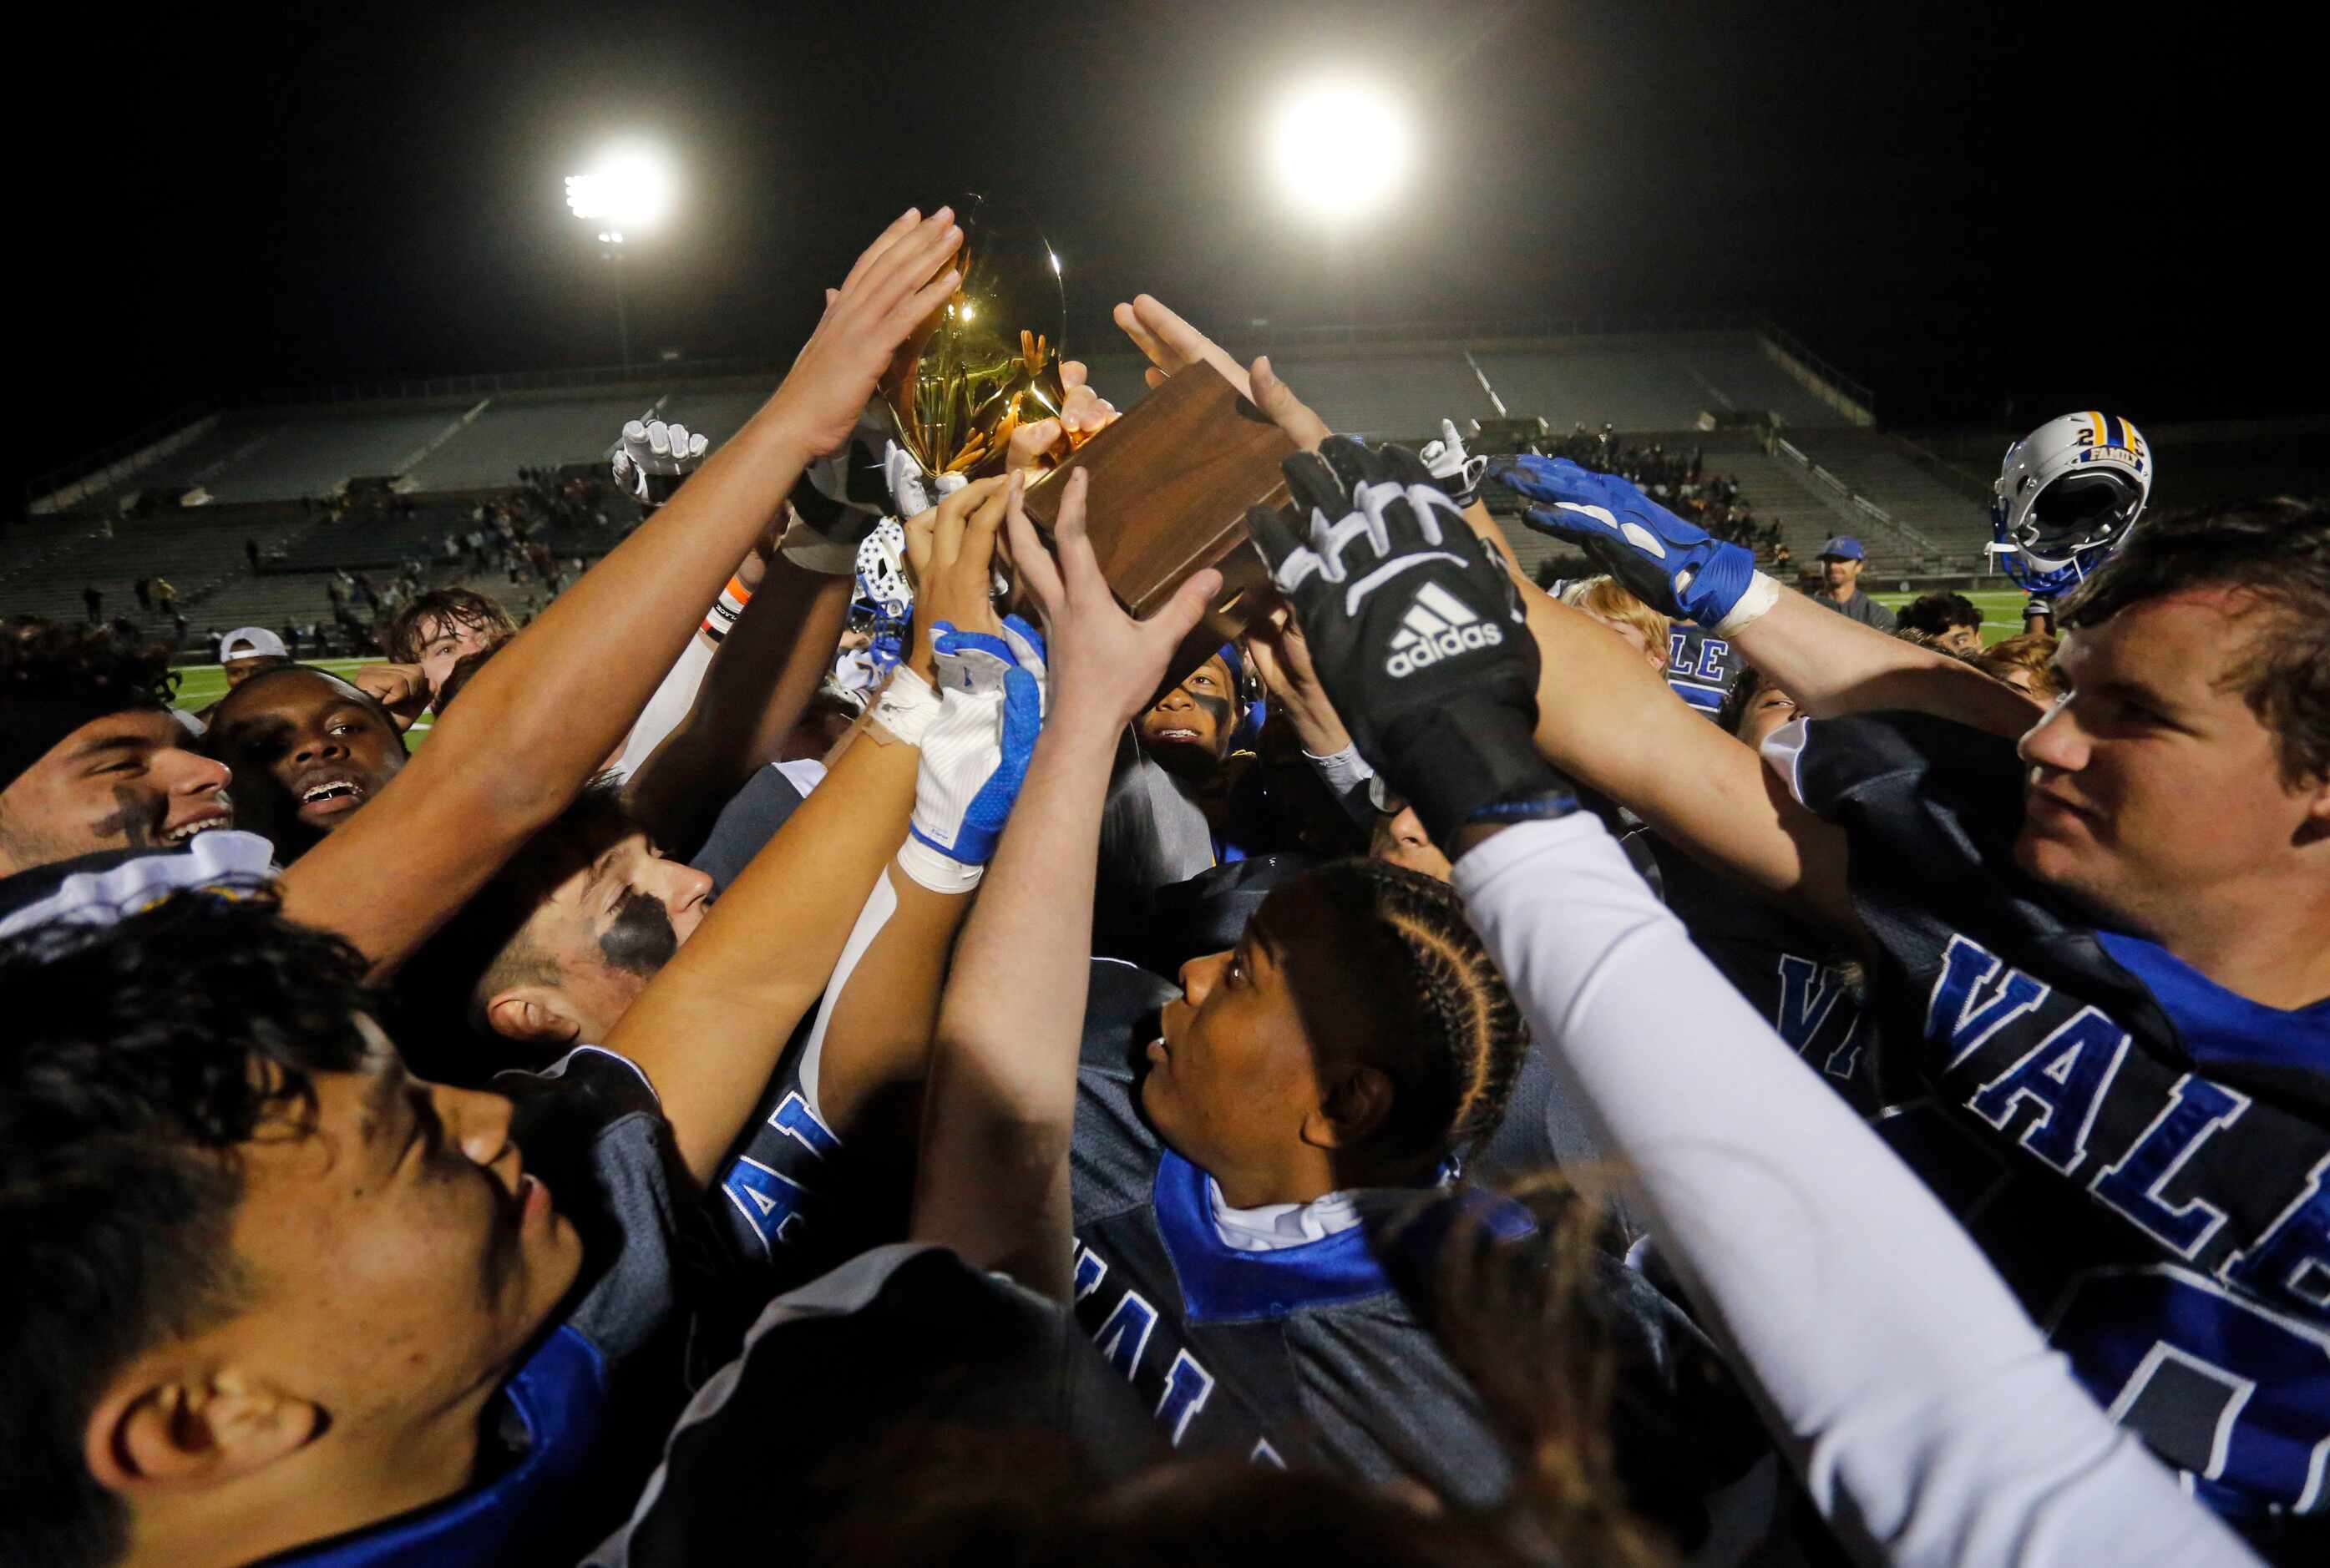 Sunnyvale players reach in to touch the game trophy, as they celebrate at the end of their...